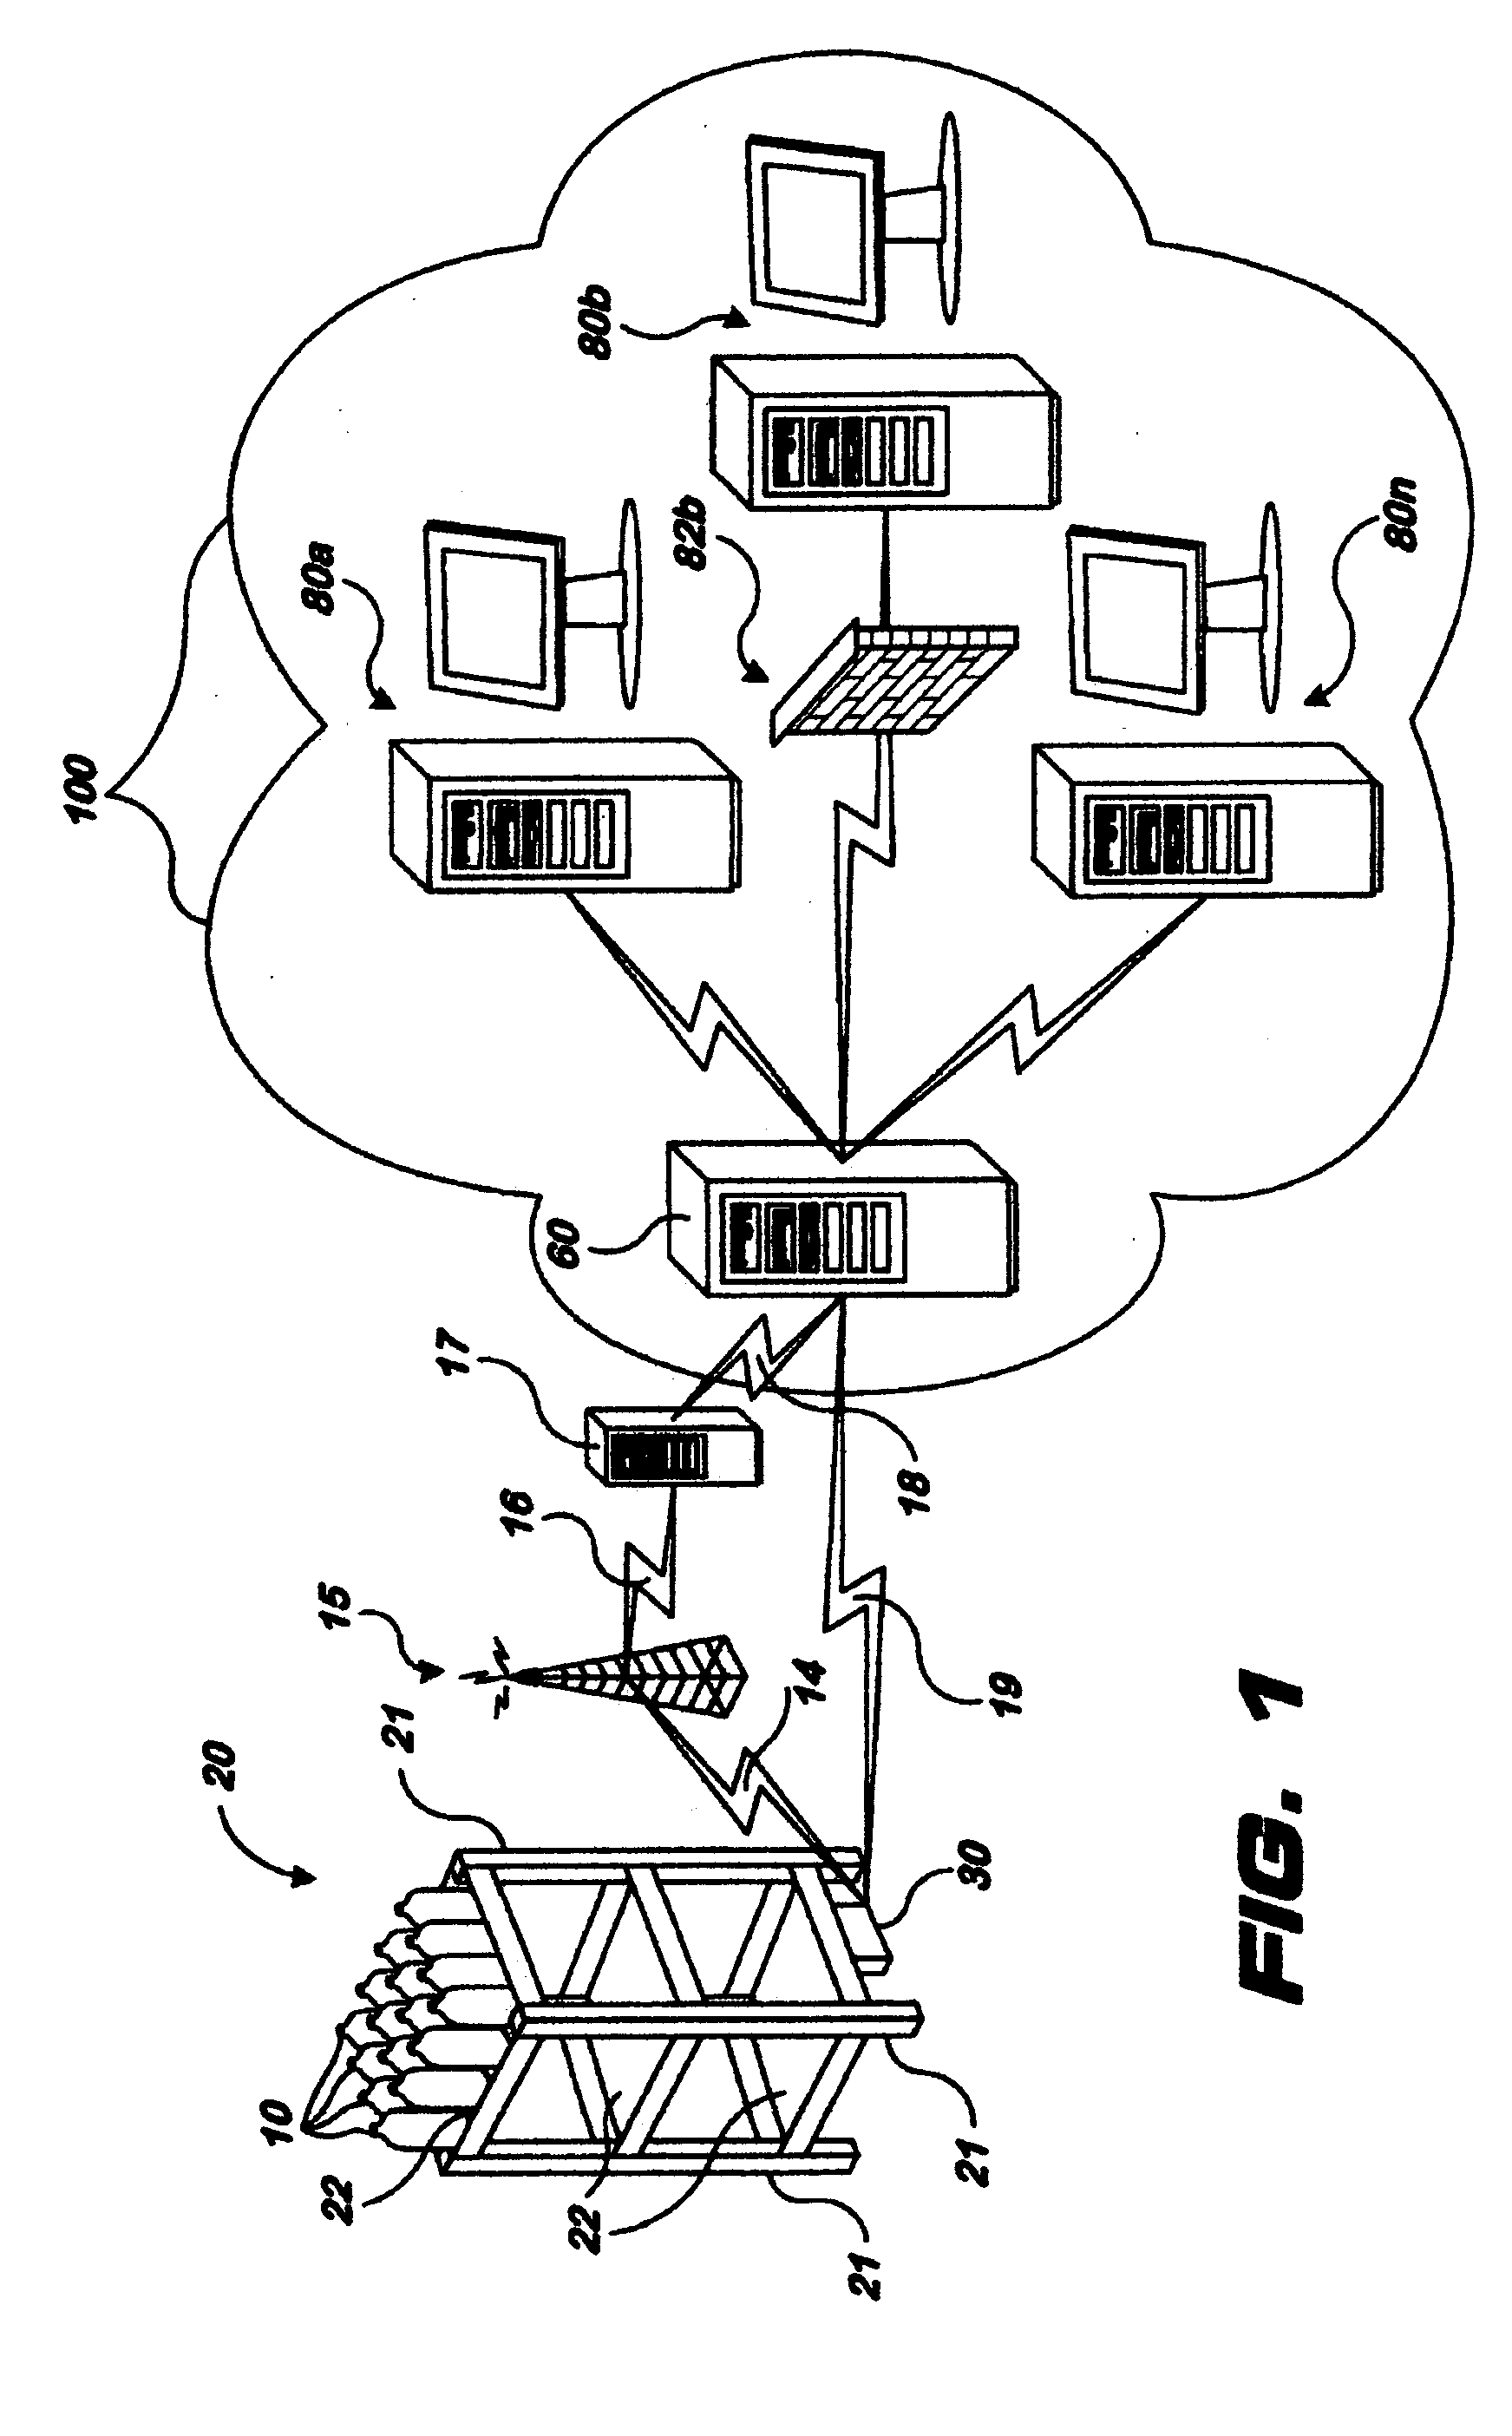 System and method for sensing and analyzing inventory levels and consumer buying habits